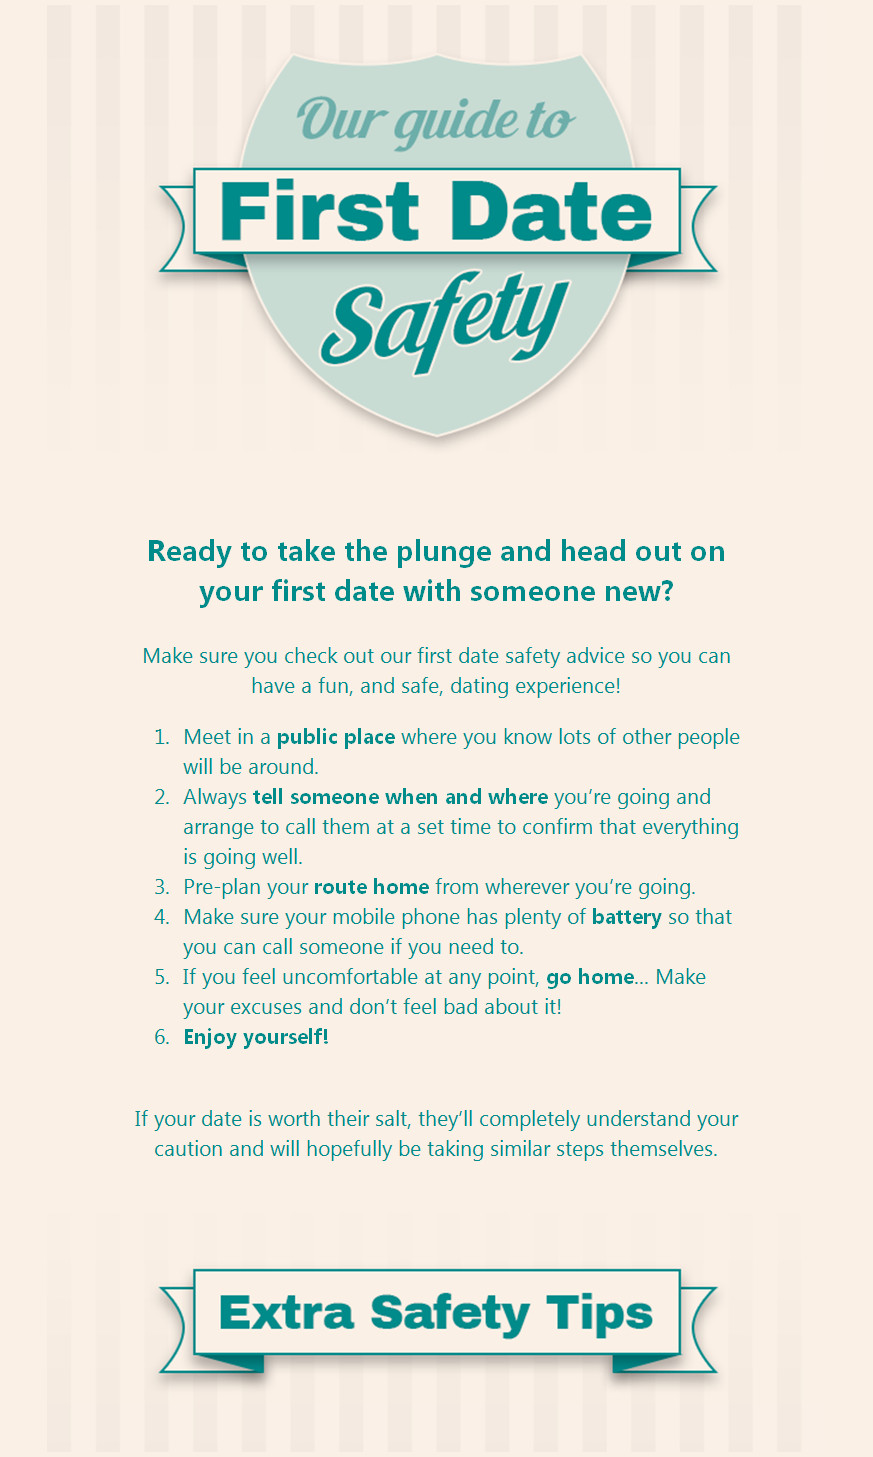 Stay safe when meeting someone for the first time. Our guide to first date safety.